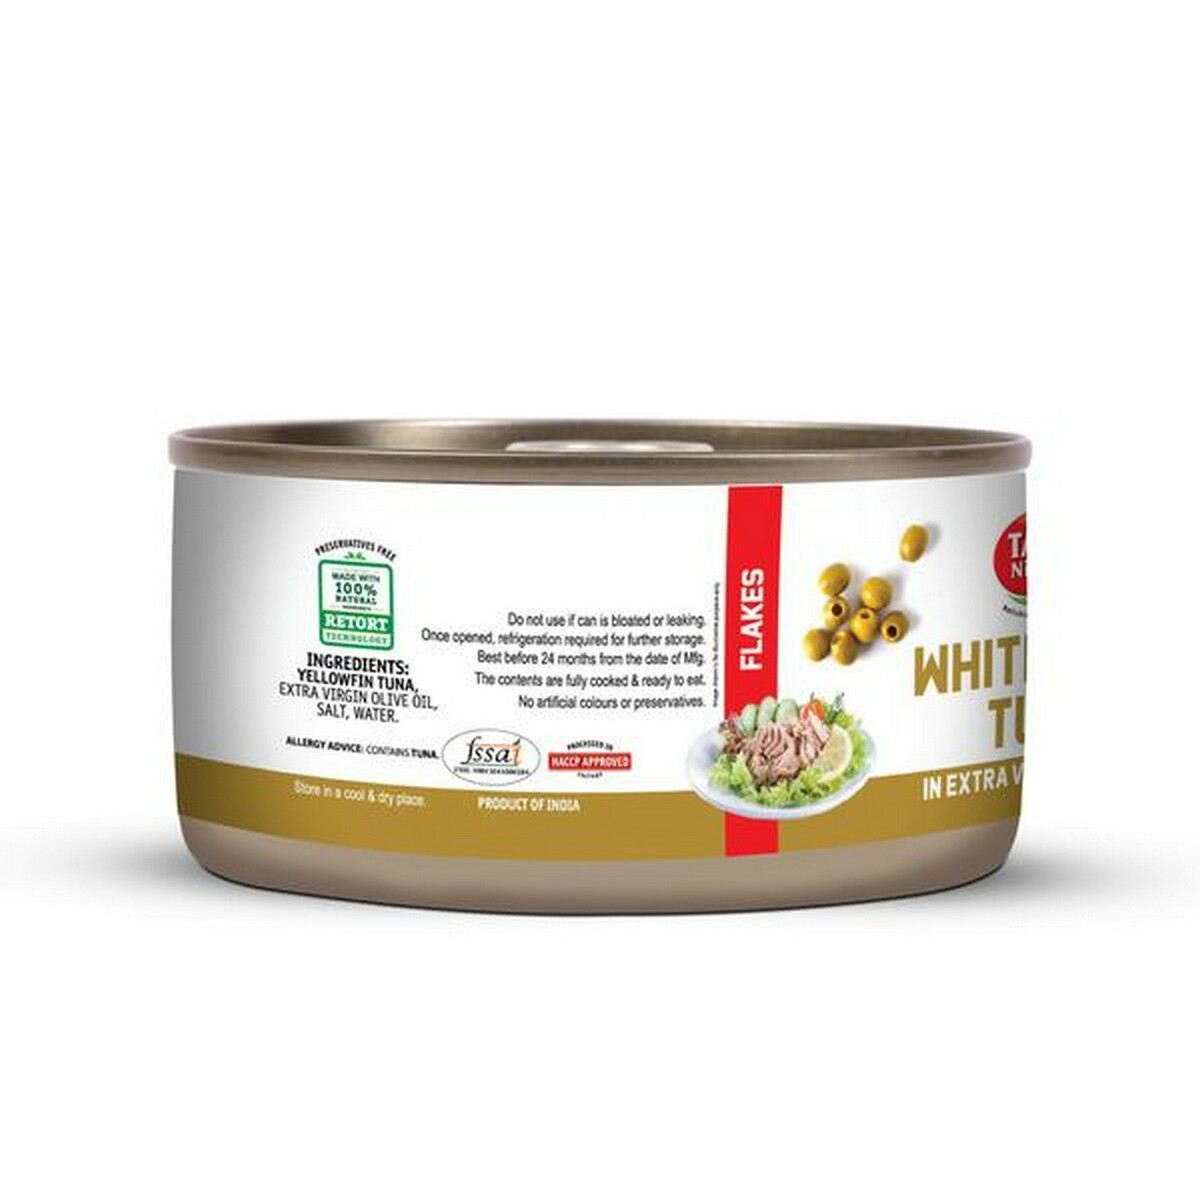 Tasty Nibbles  White Meat Flakess In Irgin Olive Oil  185G